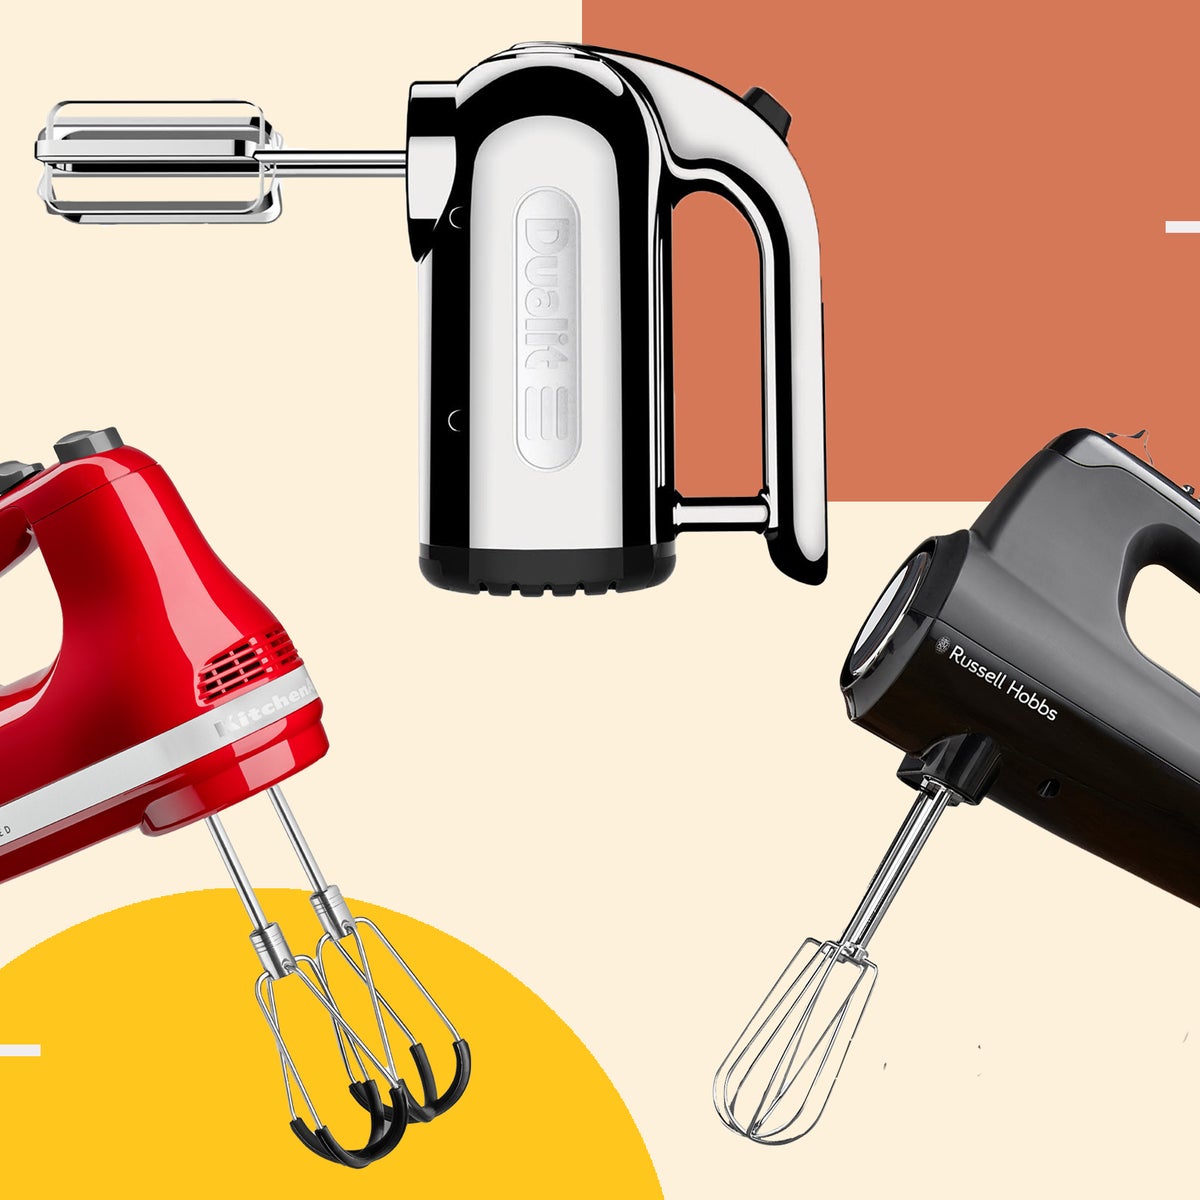 Best hand mixer 2022: Russell Hobbs, KitchenAid and more